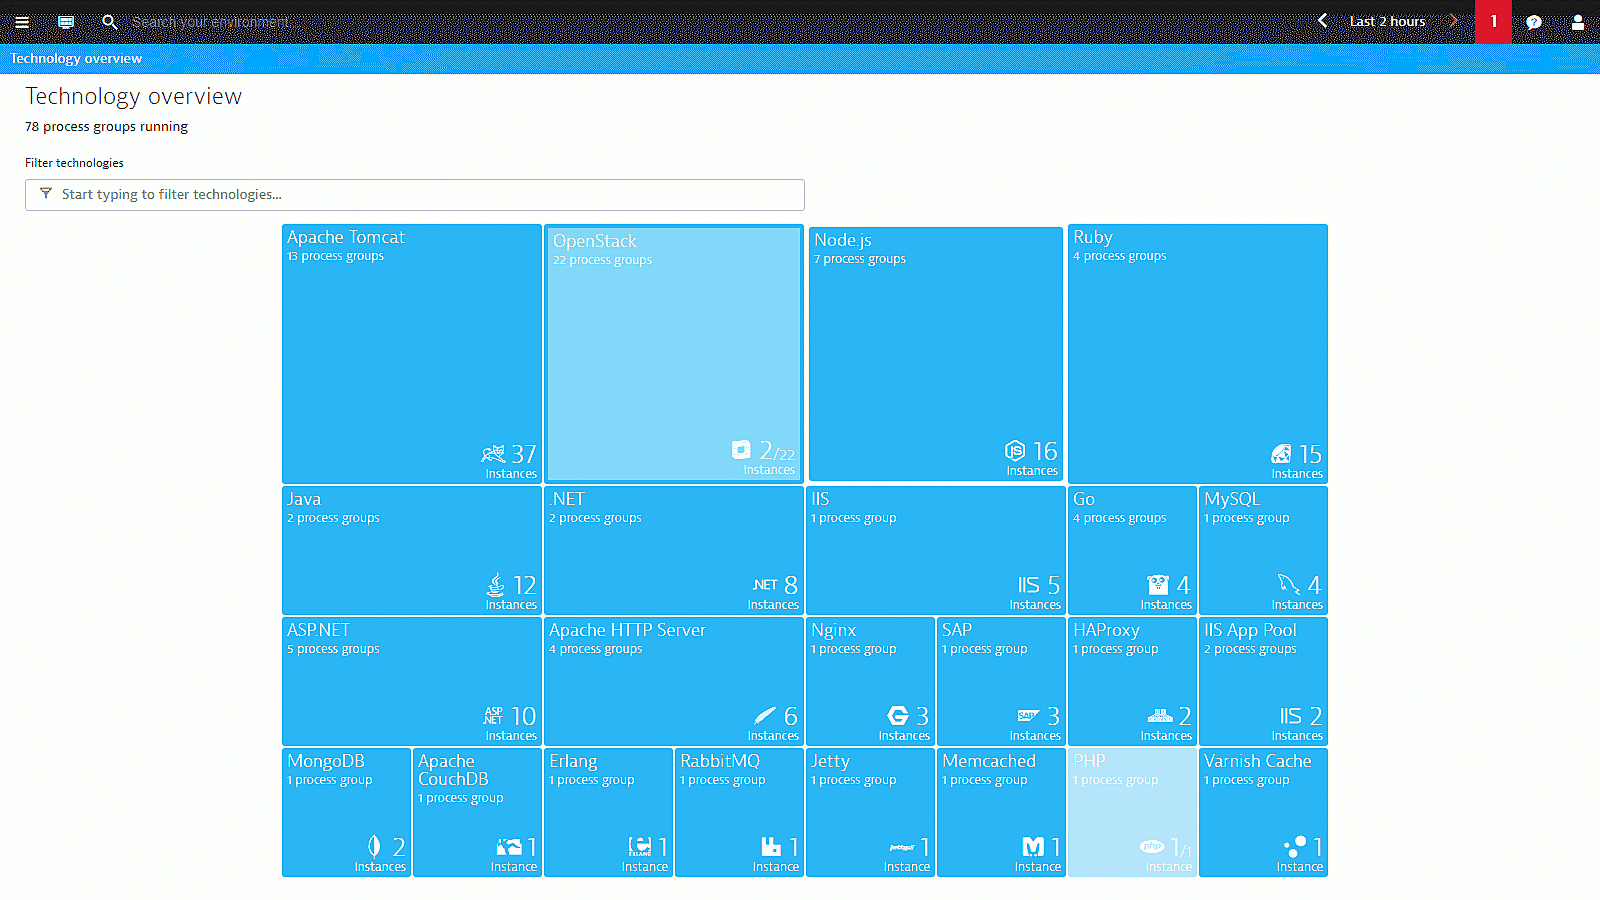 Technology overview in Dynatrace screenshot